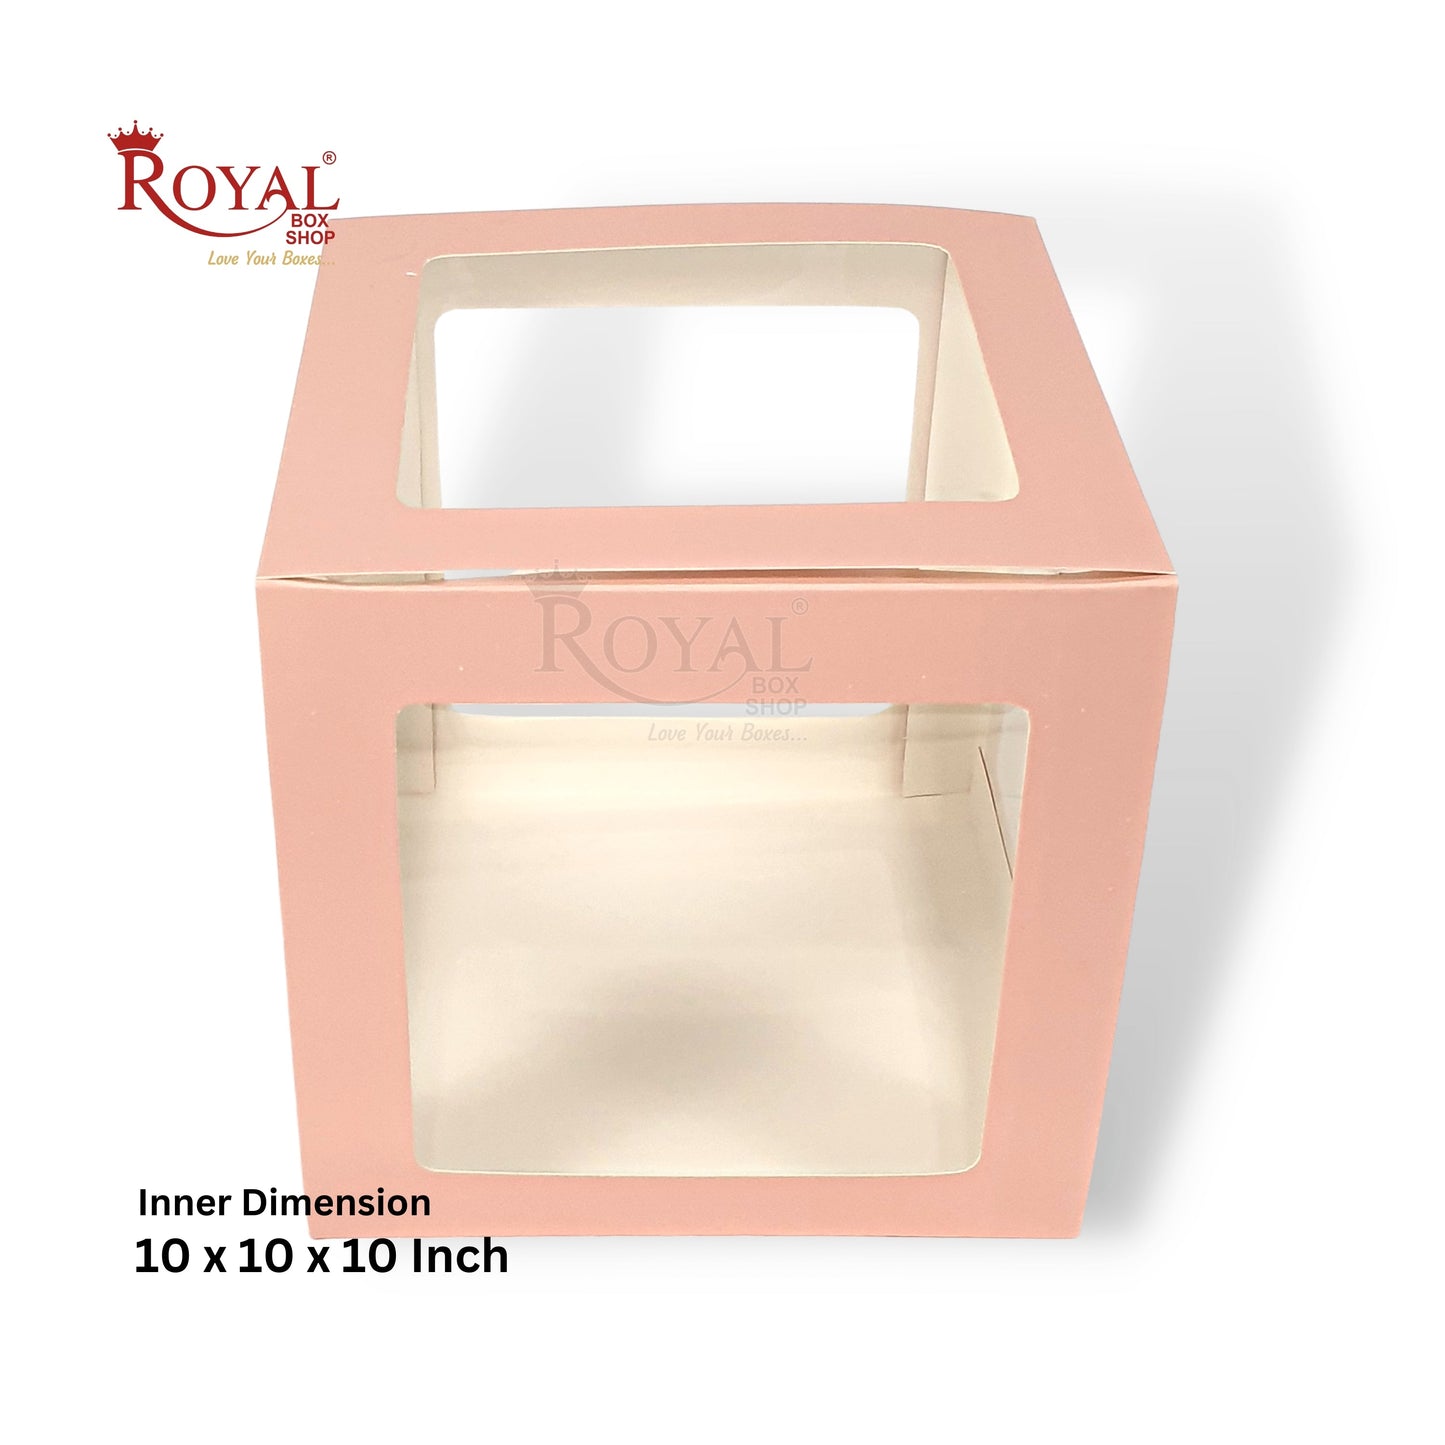 RoyalBoxShop® 5-Window Gift Box I 10x10x10 Inch I Pink I Perfect for Bakery Cakes, Gifts, Parties, Any Occasion Royal Box Shop